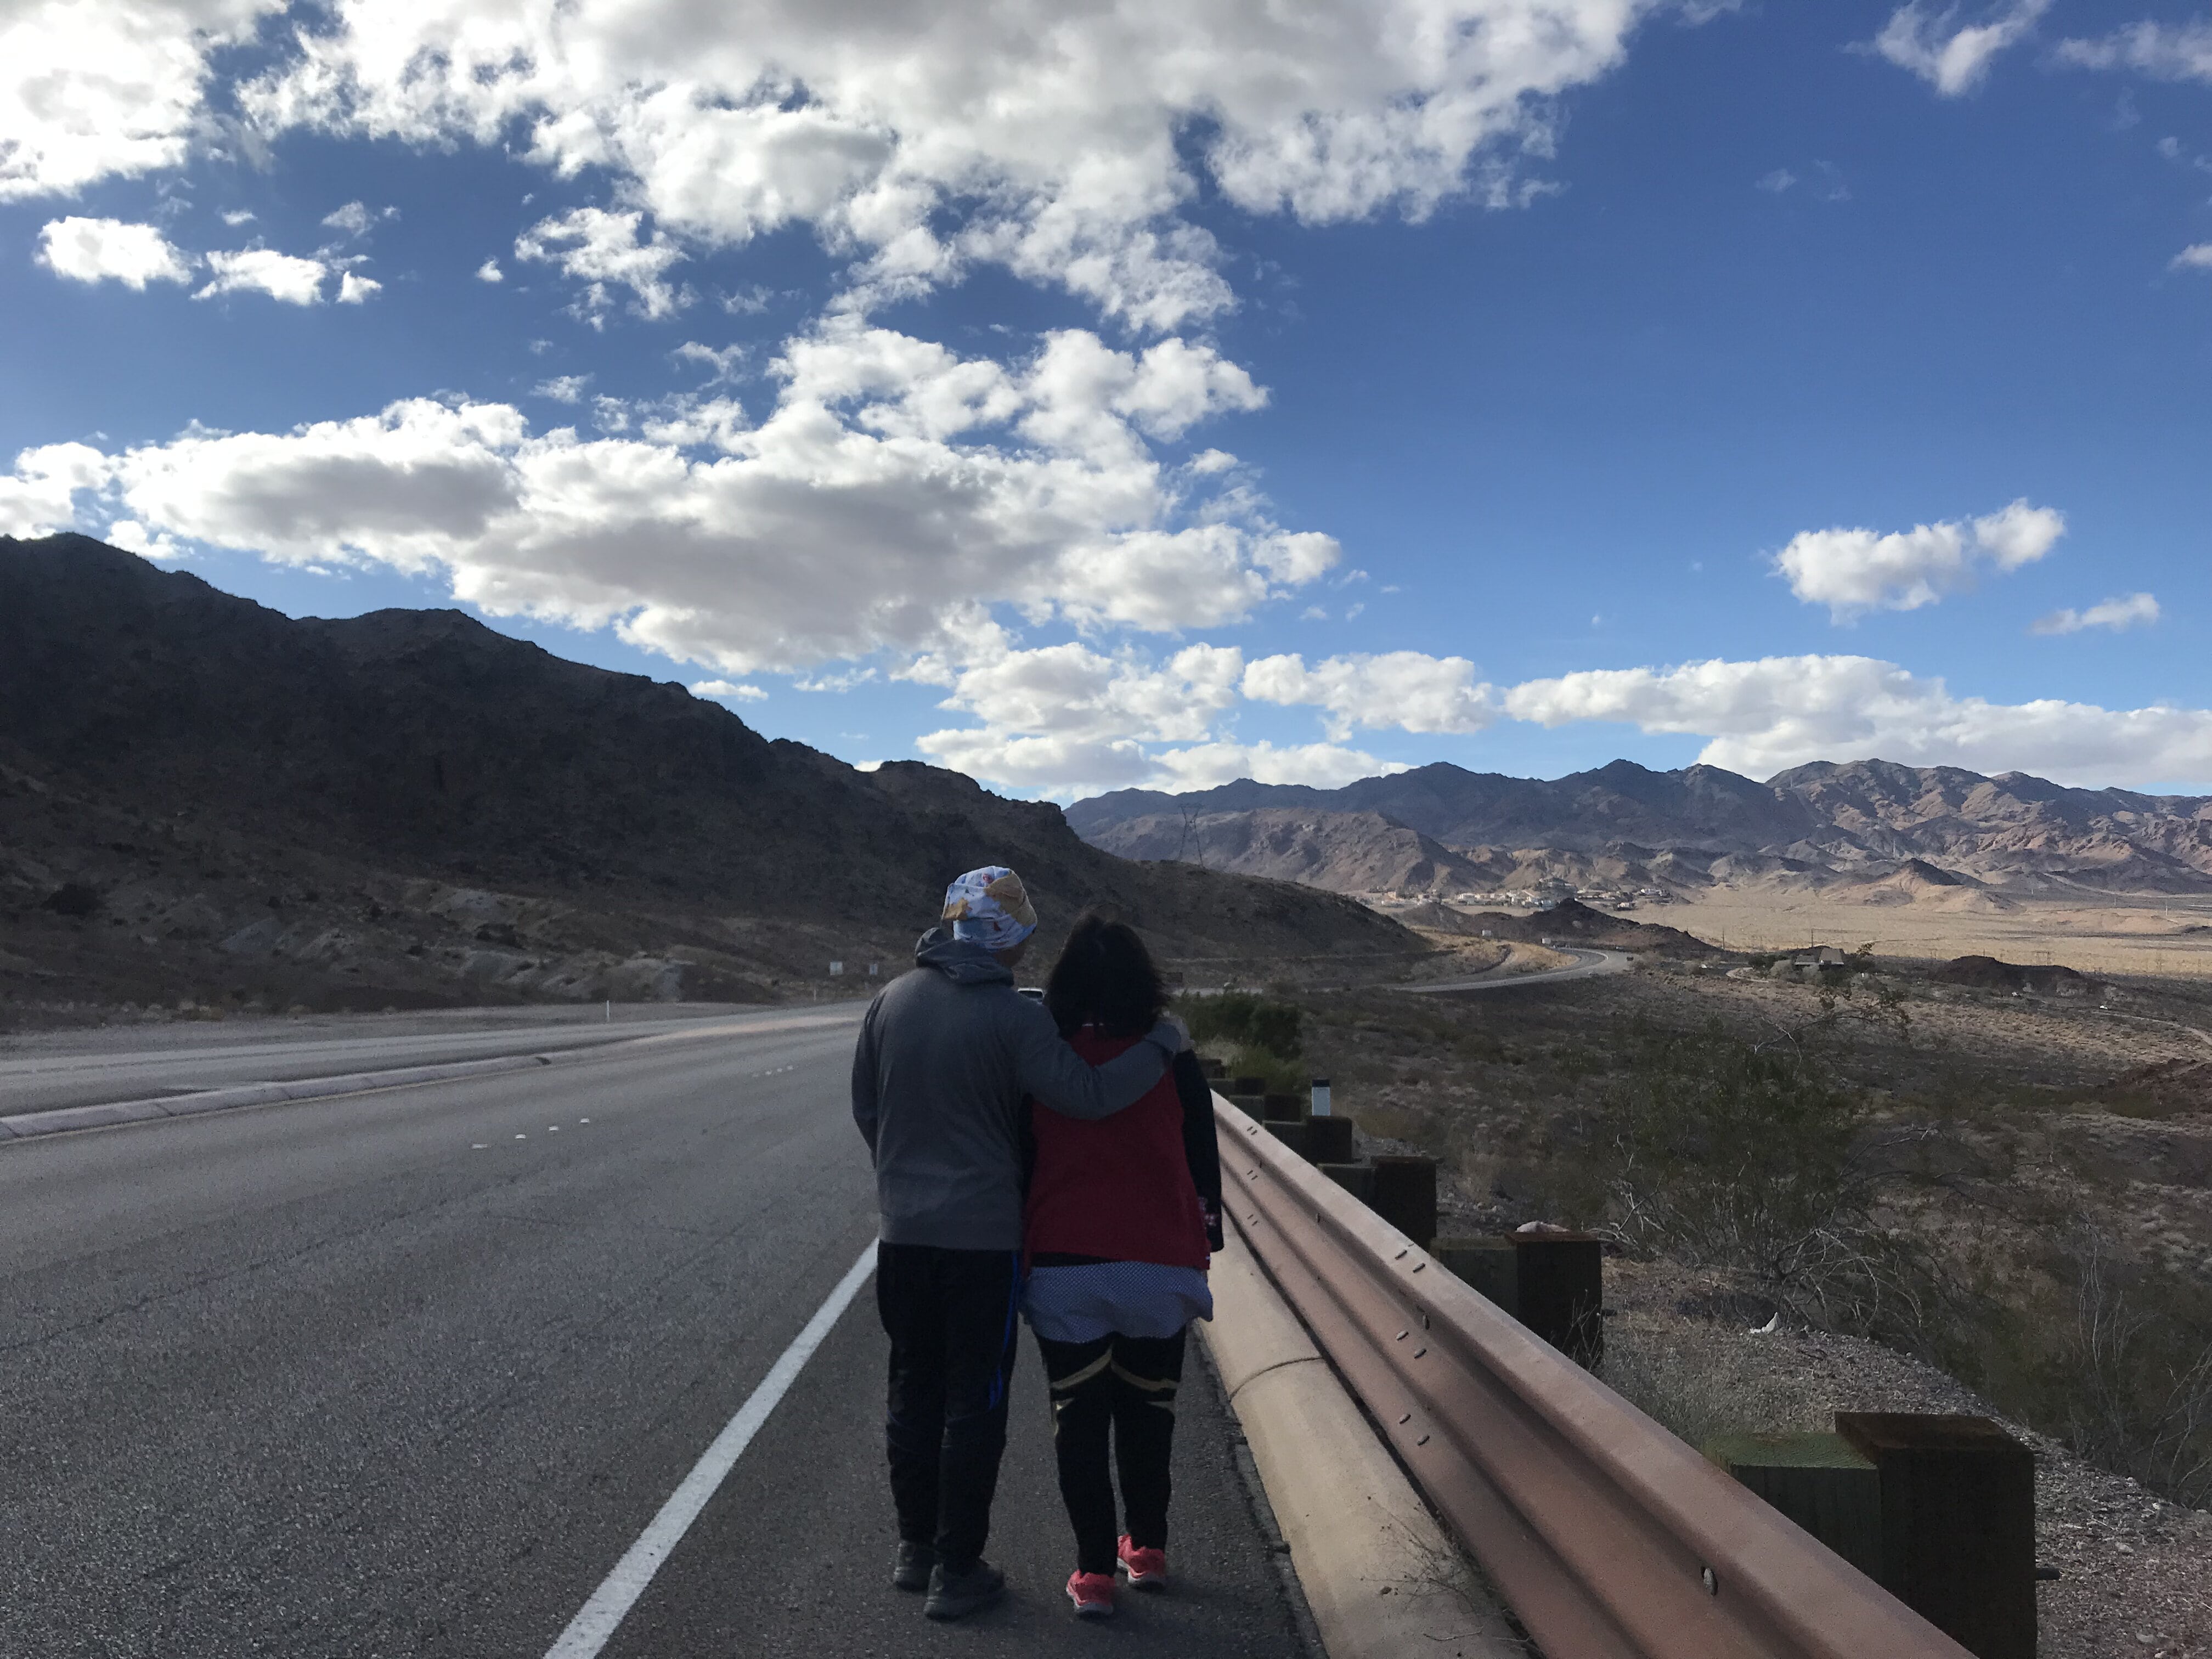 Carlos and Tess going on a hike - marriage article